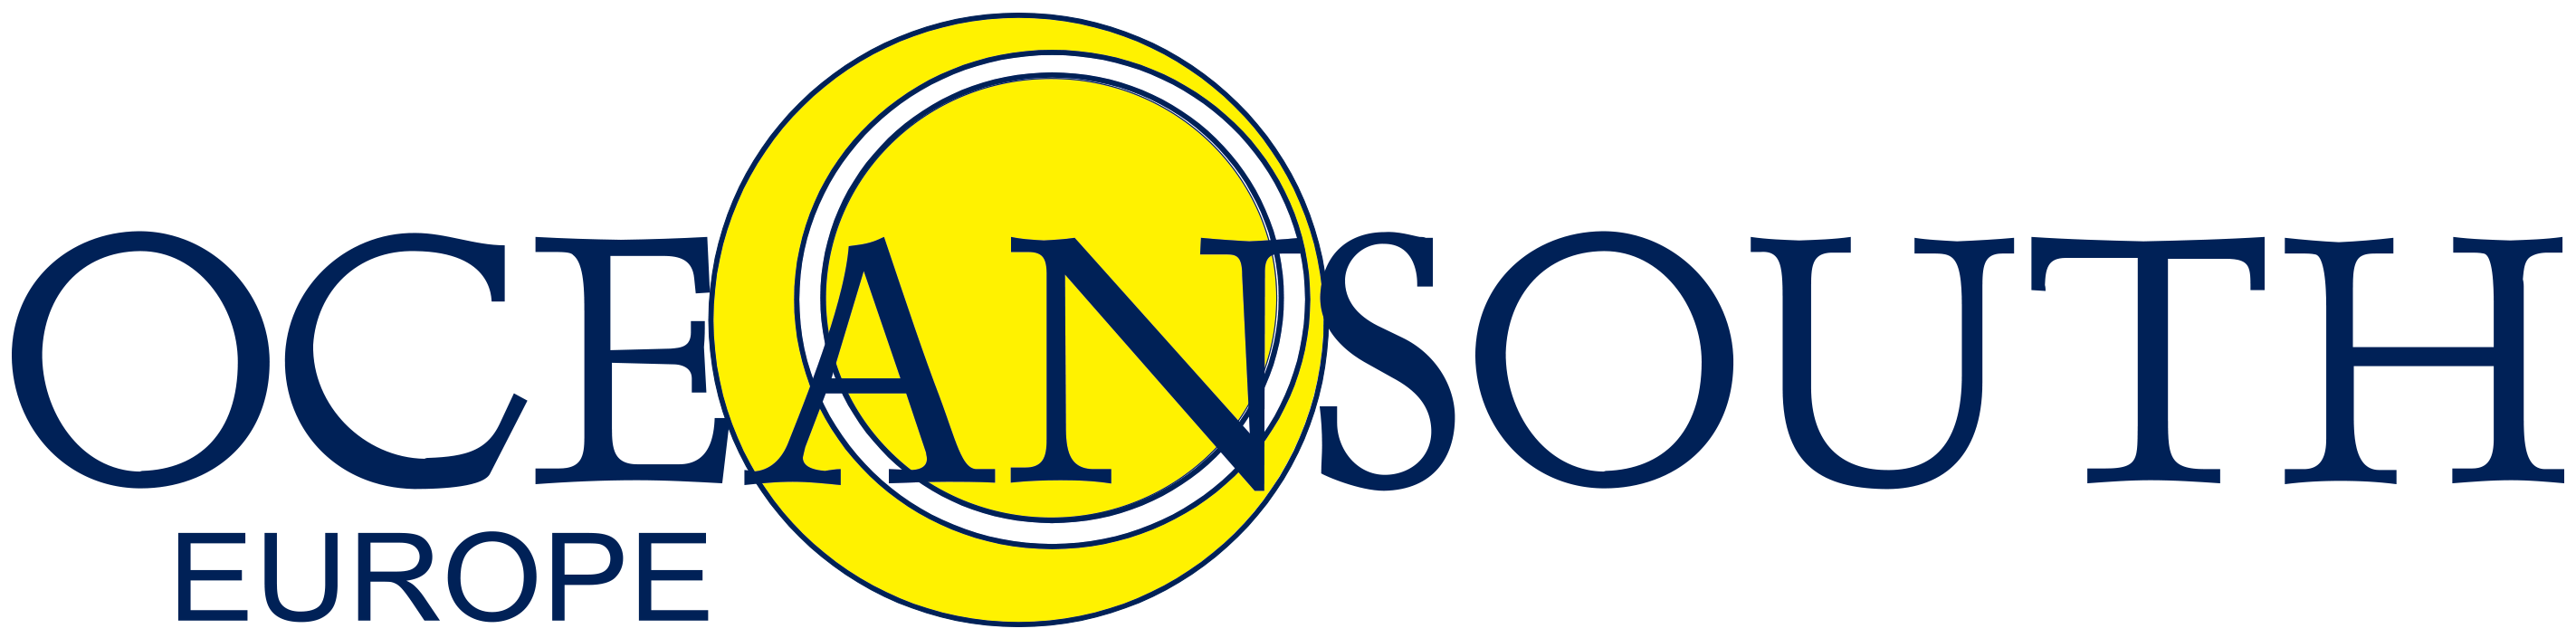 cropped-Logo-oceansouth-europe.png